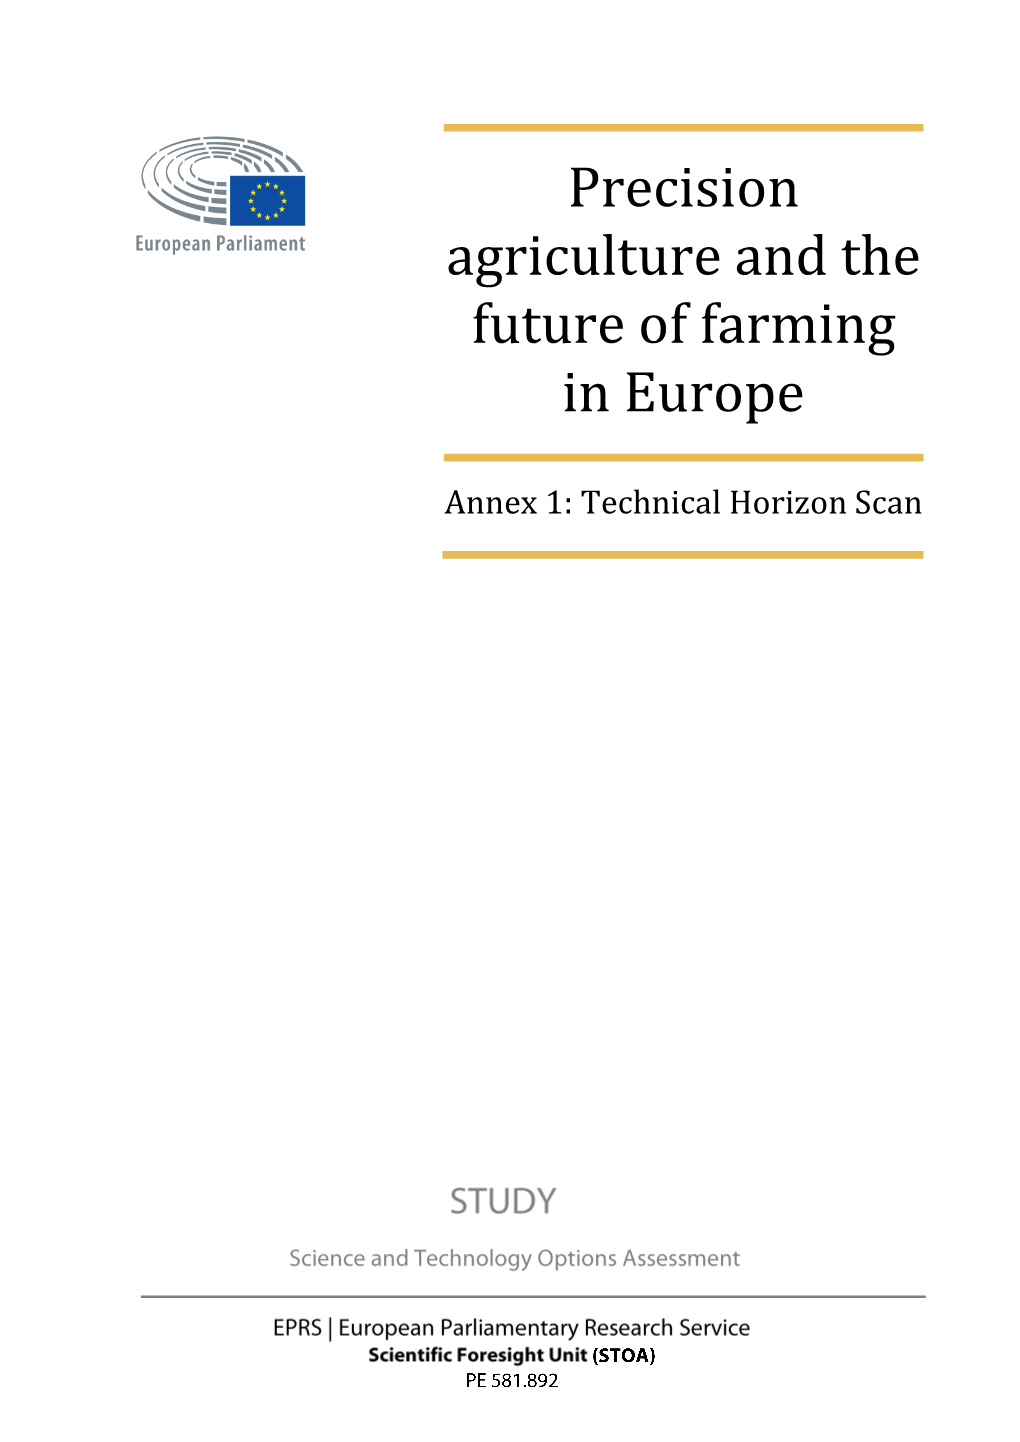 Precision Agriculture and the Future of Farming in Europe